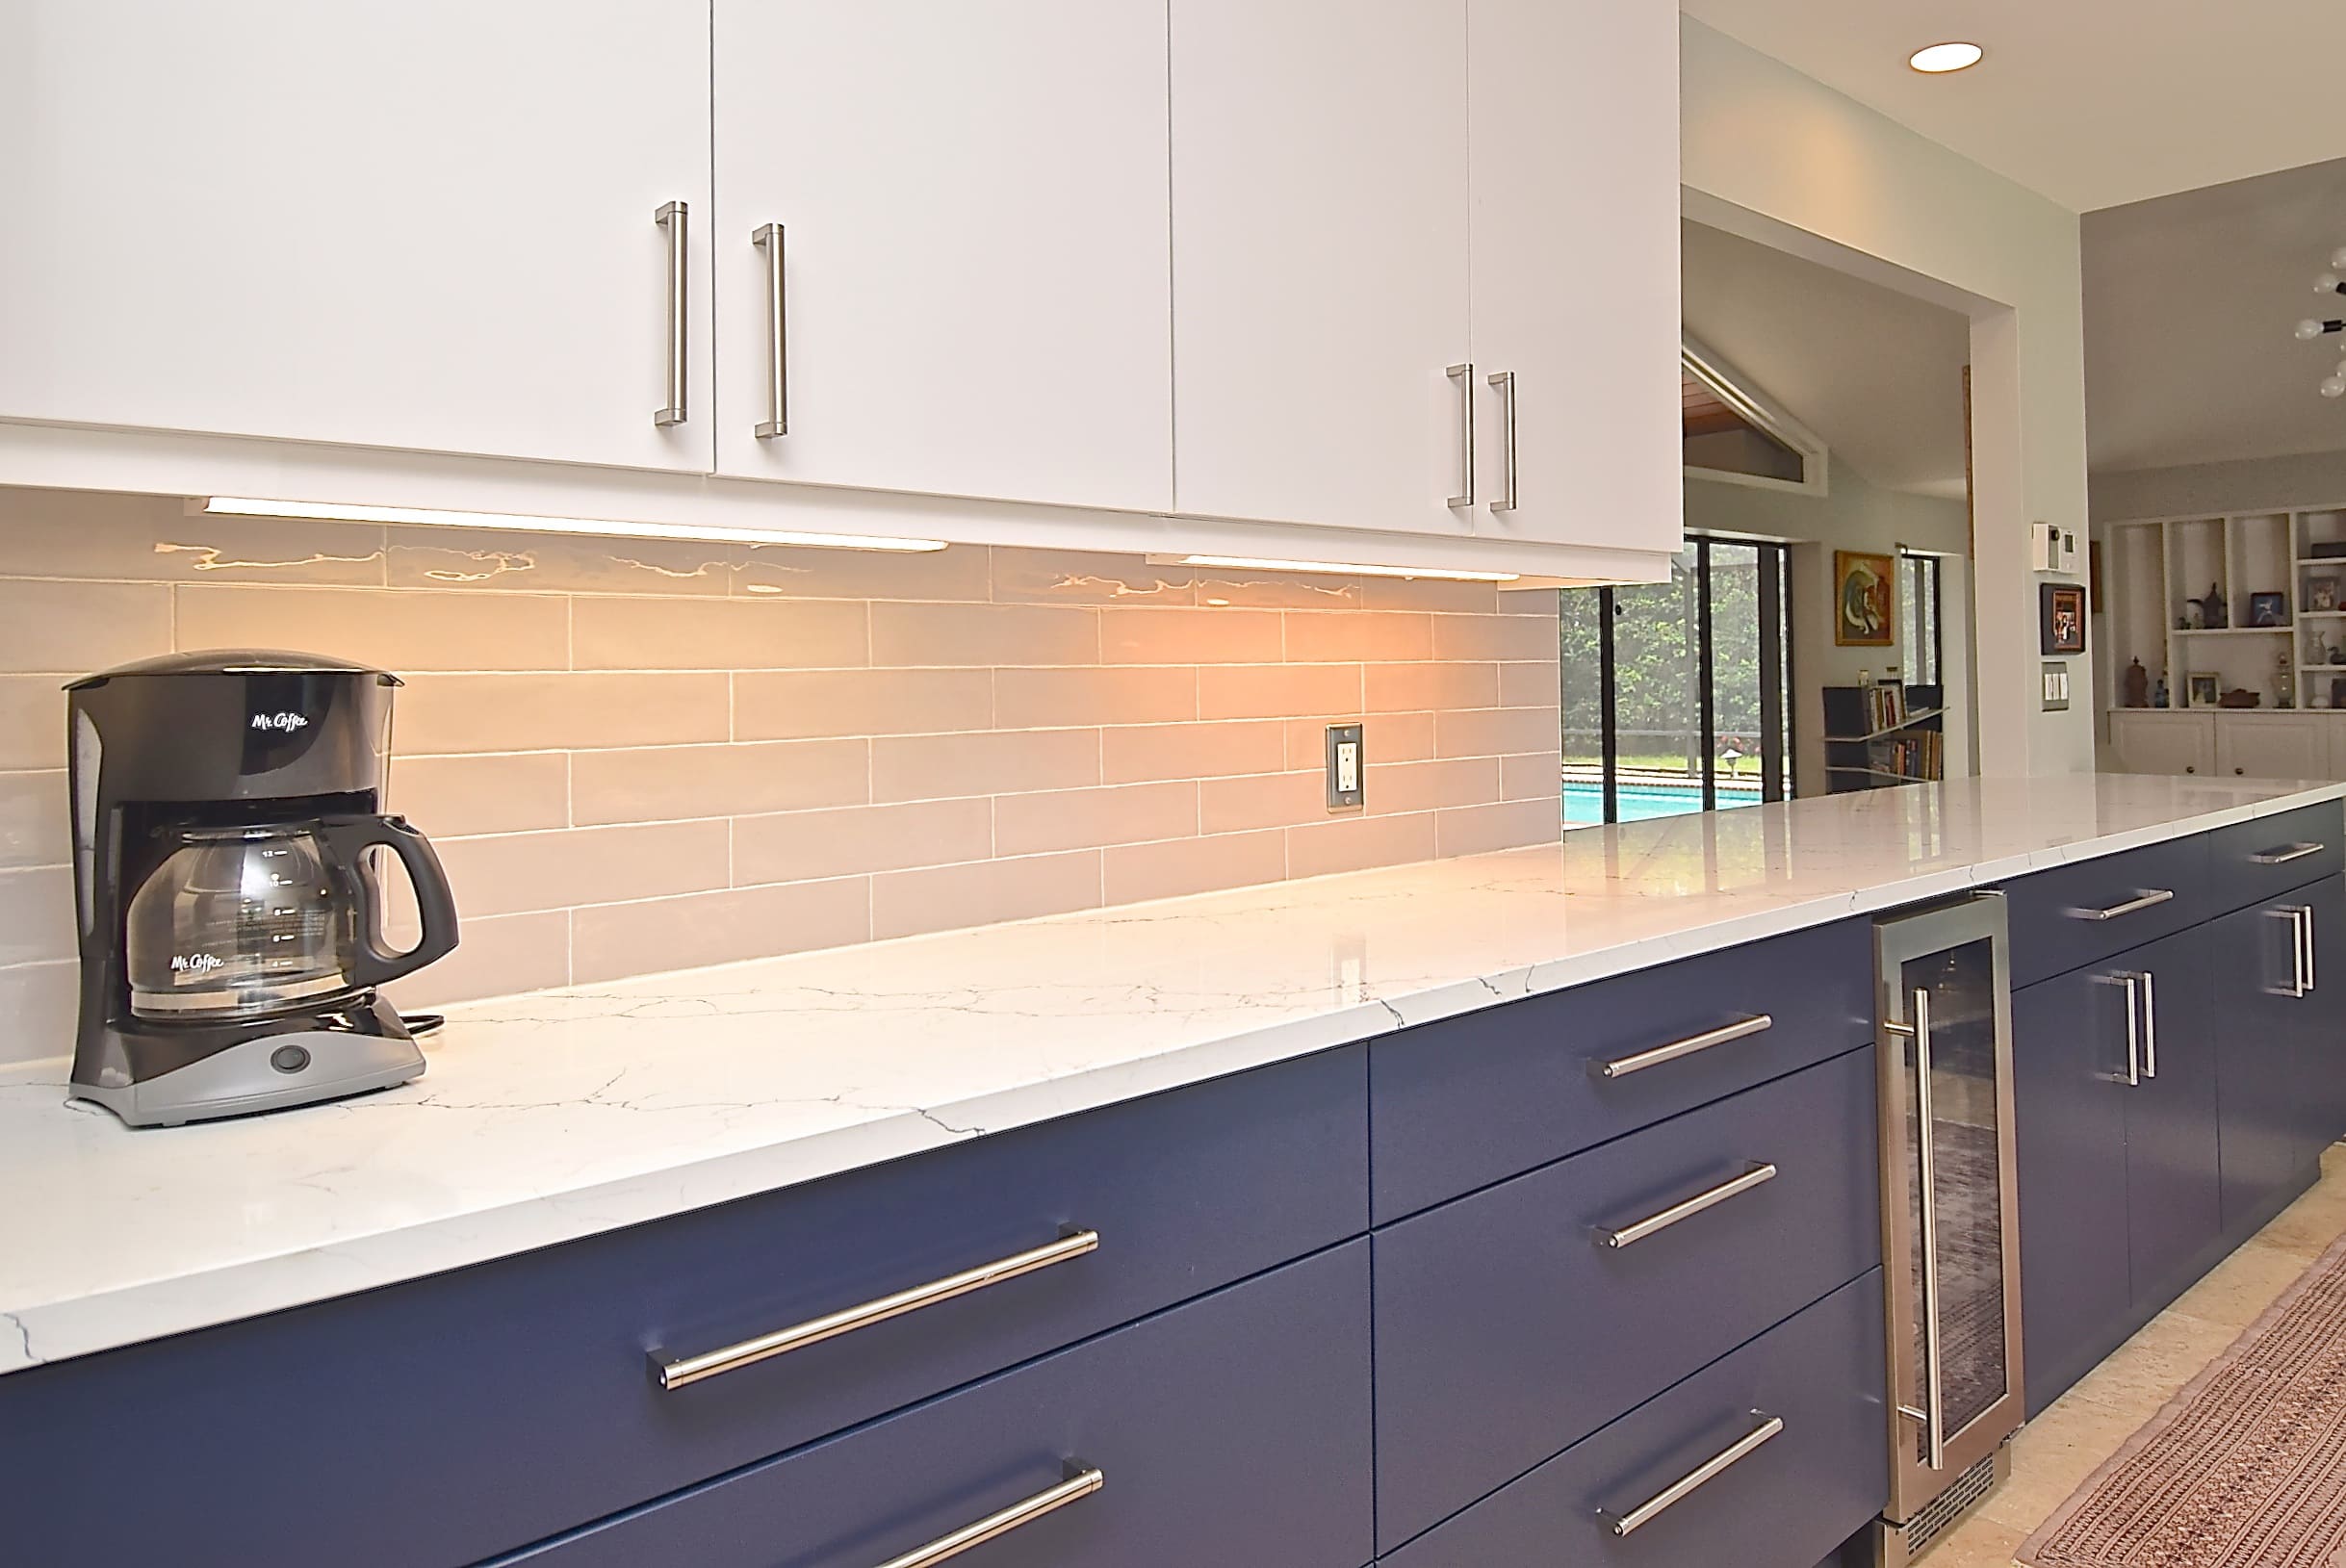 Flat Front Cabinets with Elongated Subway Tile Backsplash and White Counters in Sarasota Kitchen Remodel